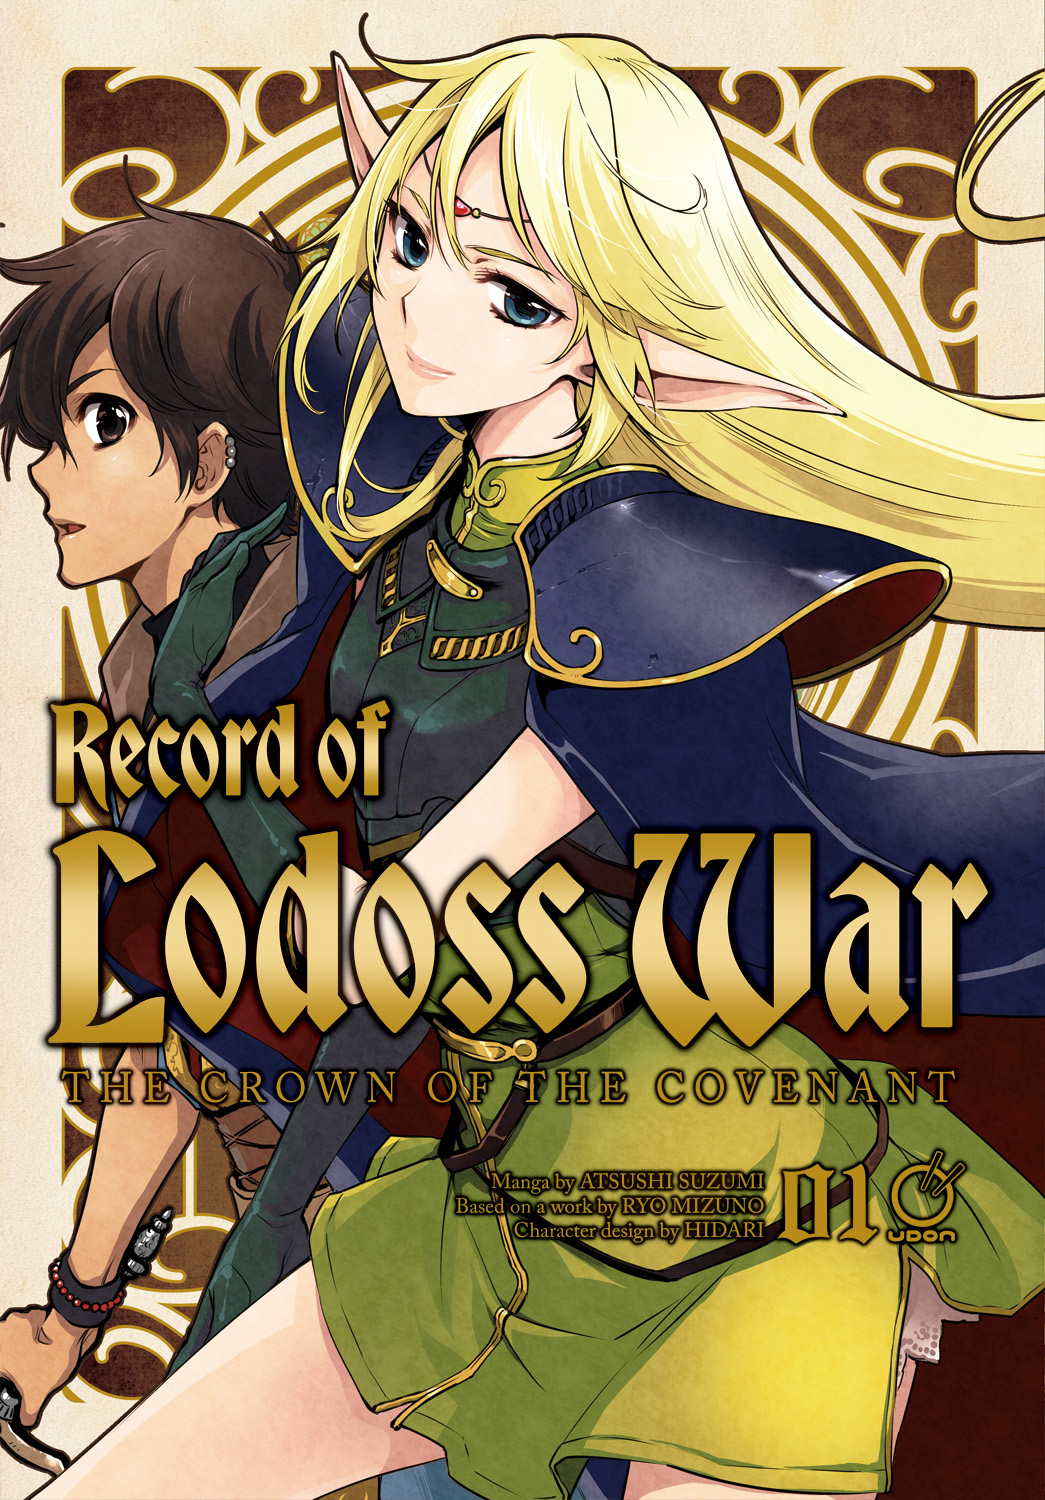 Record of Lodoss War Crown of the Covenant Manga Volume 1